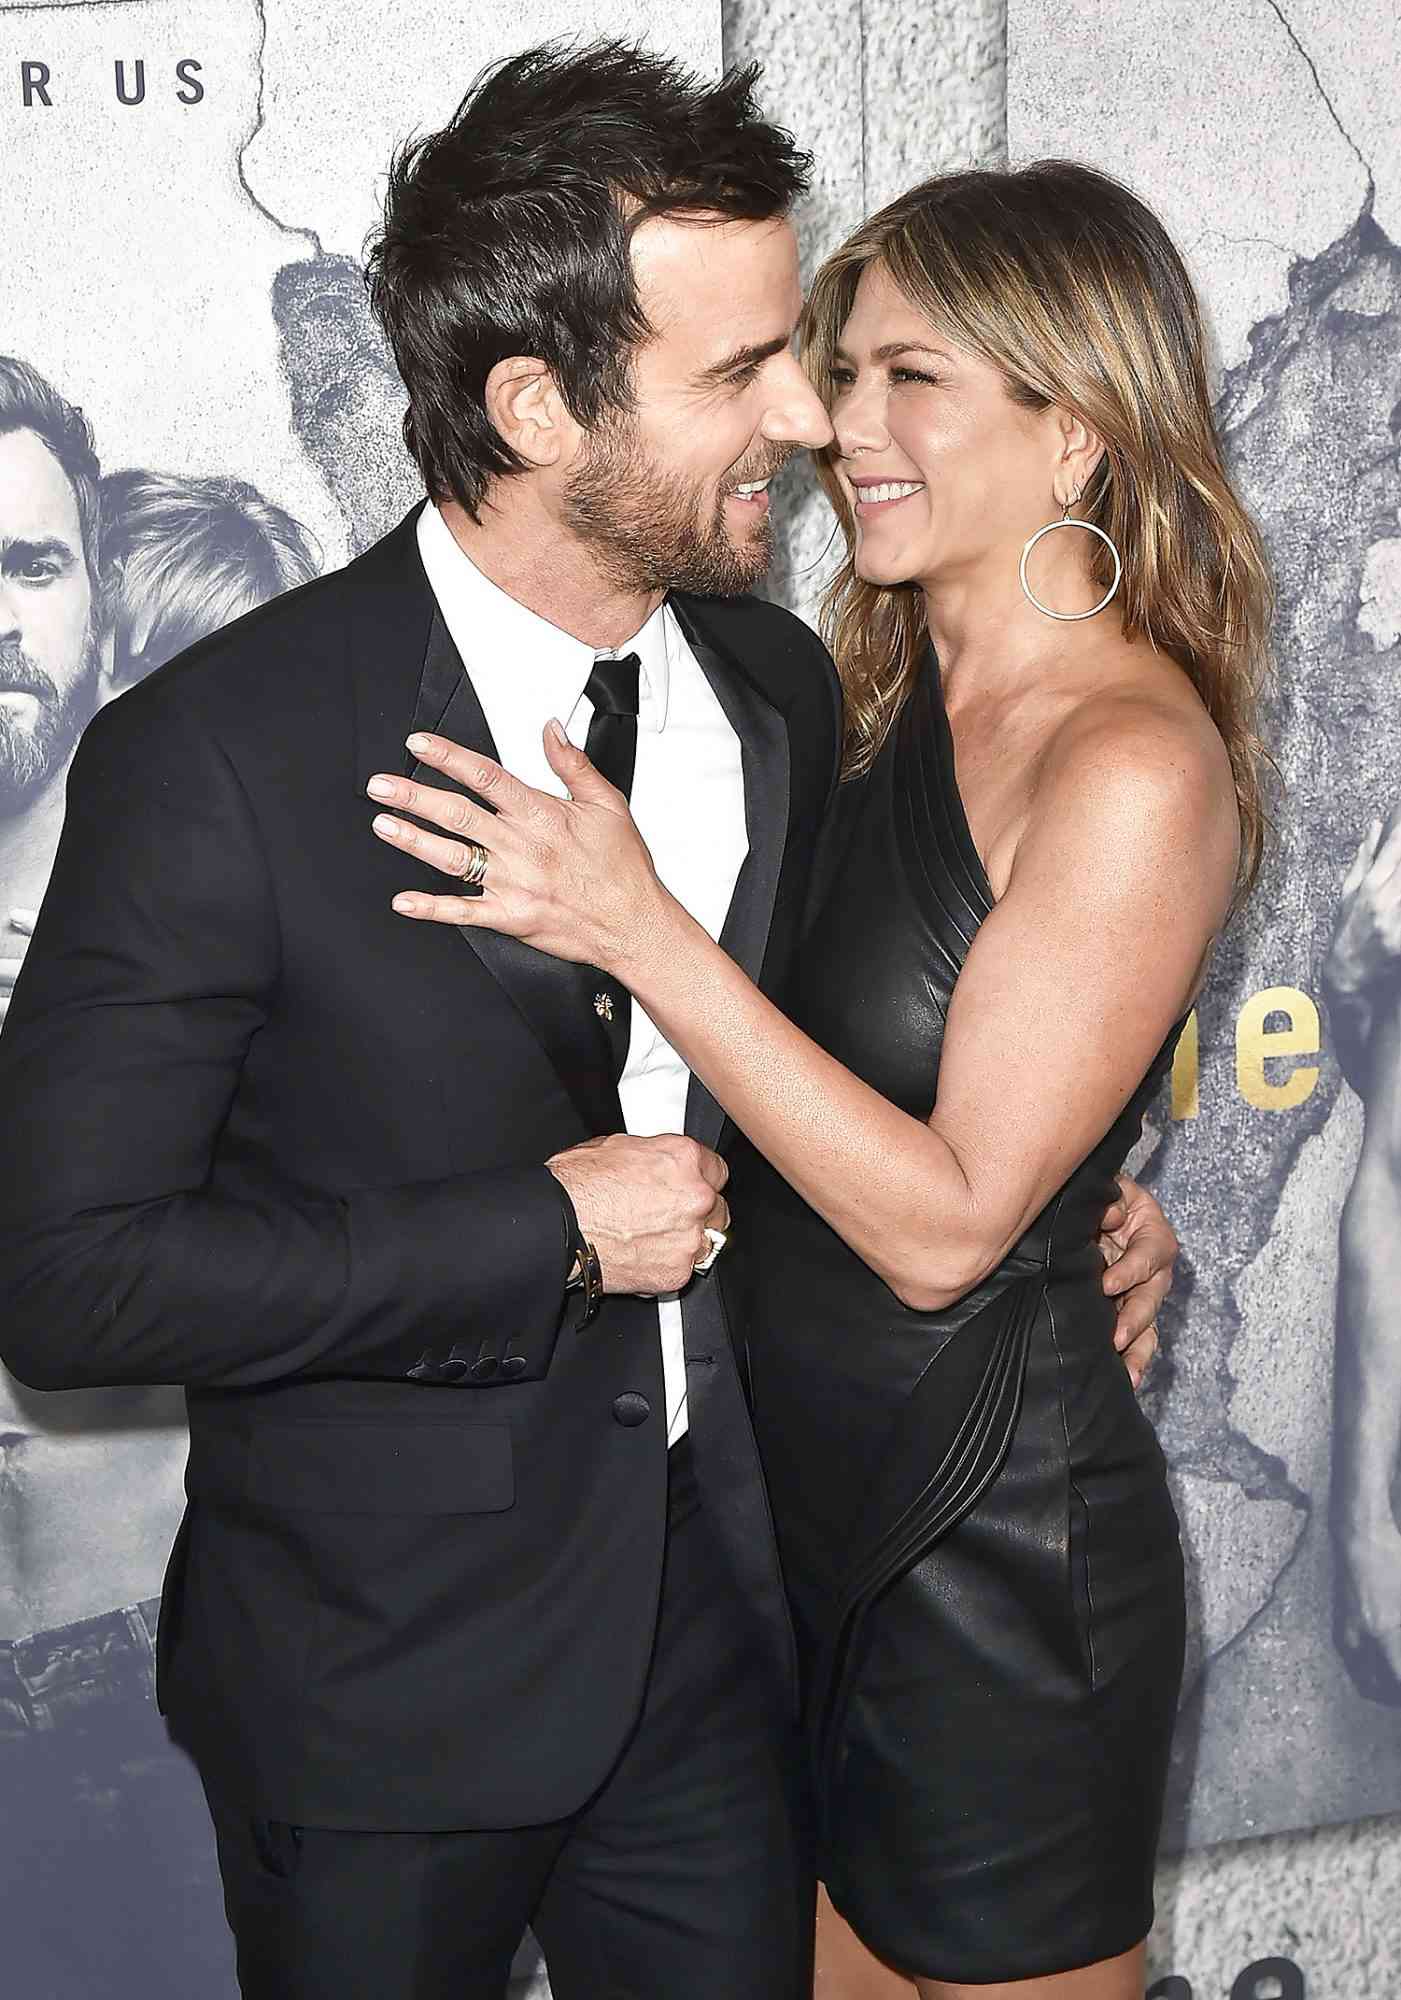 Premiere Of HBO's "The Leftovers" Season 3 - Arrivals